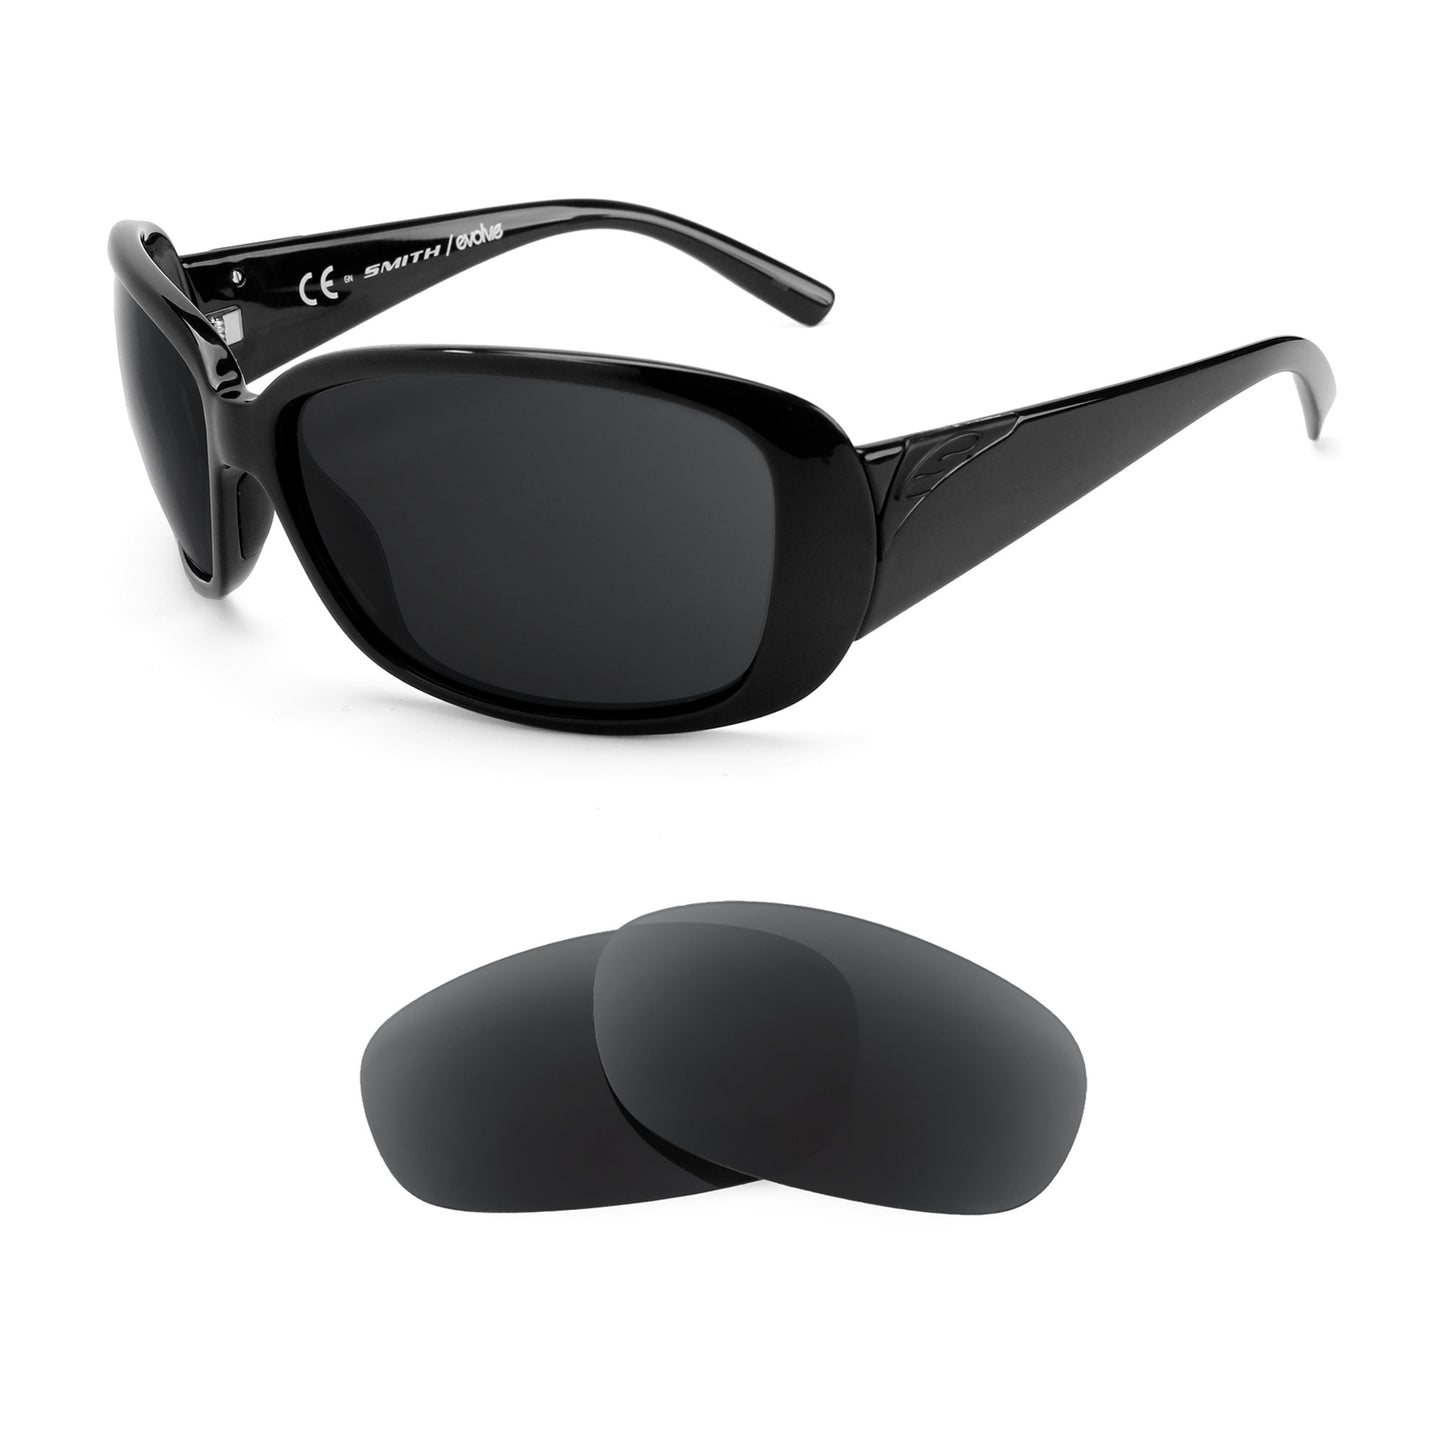 Smith Shorewood sunglasses with replacement lenses